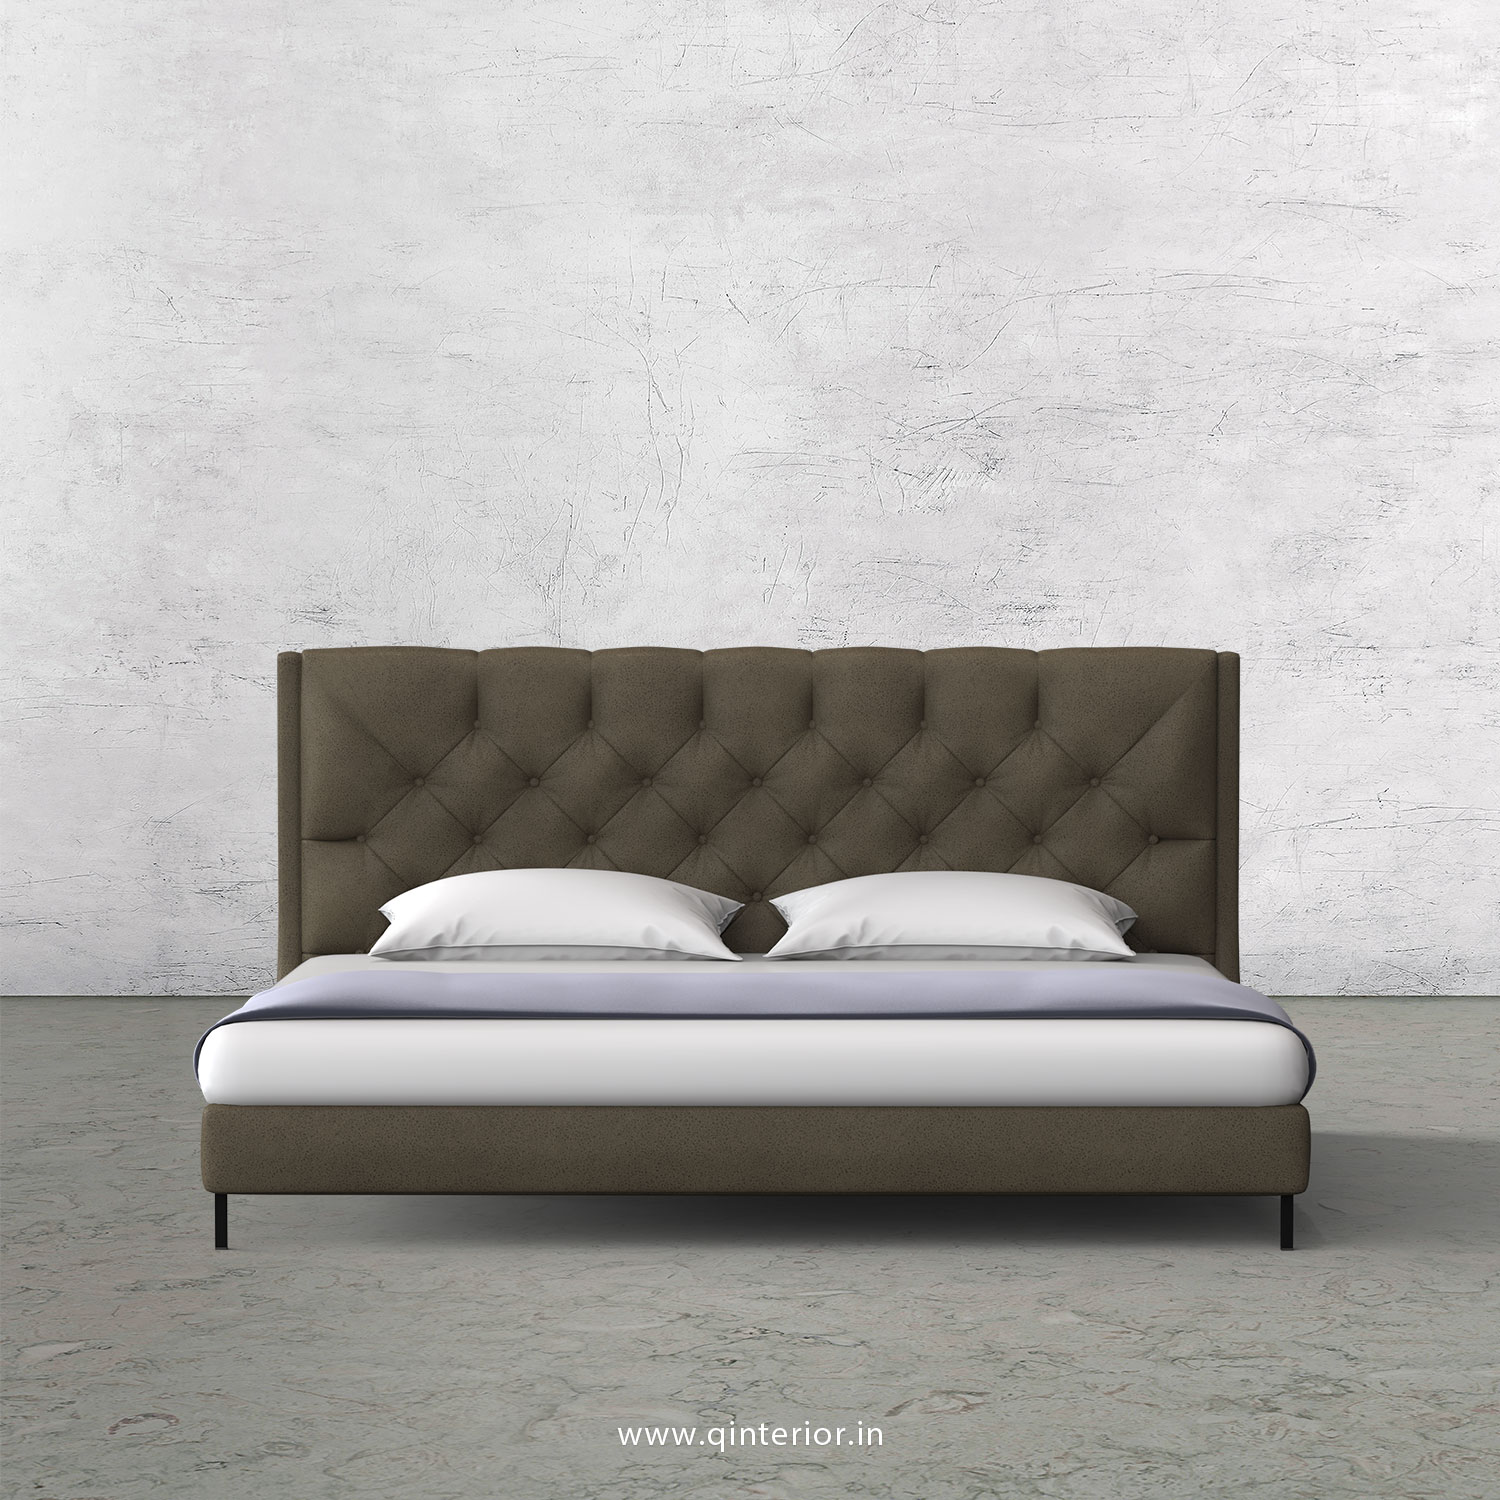 Scorpius King Size Bed in Fab Leather Fabric - KBD003 FL06